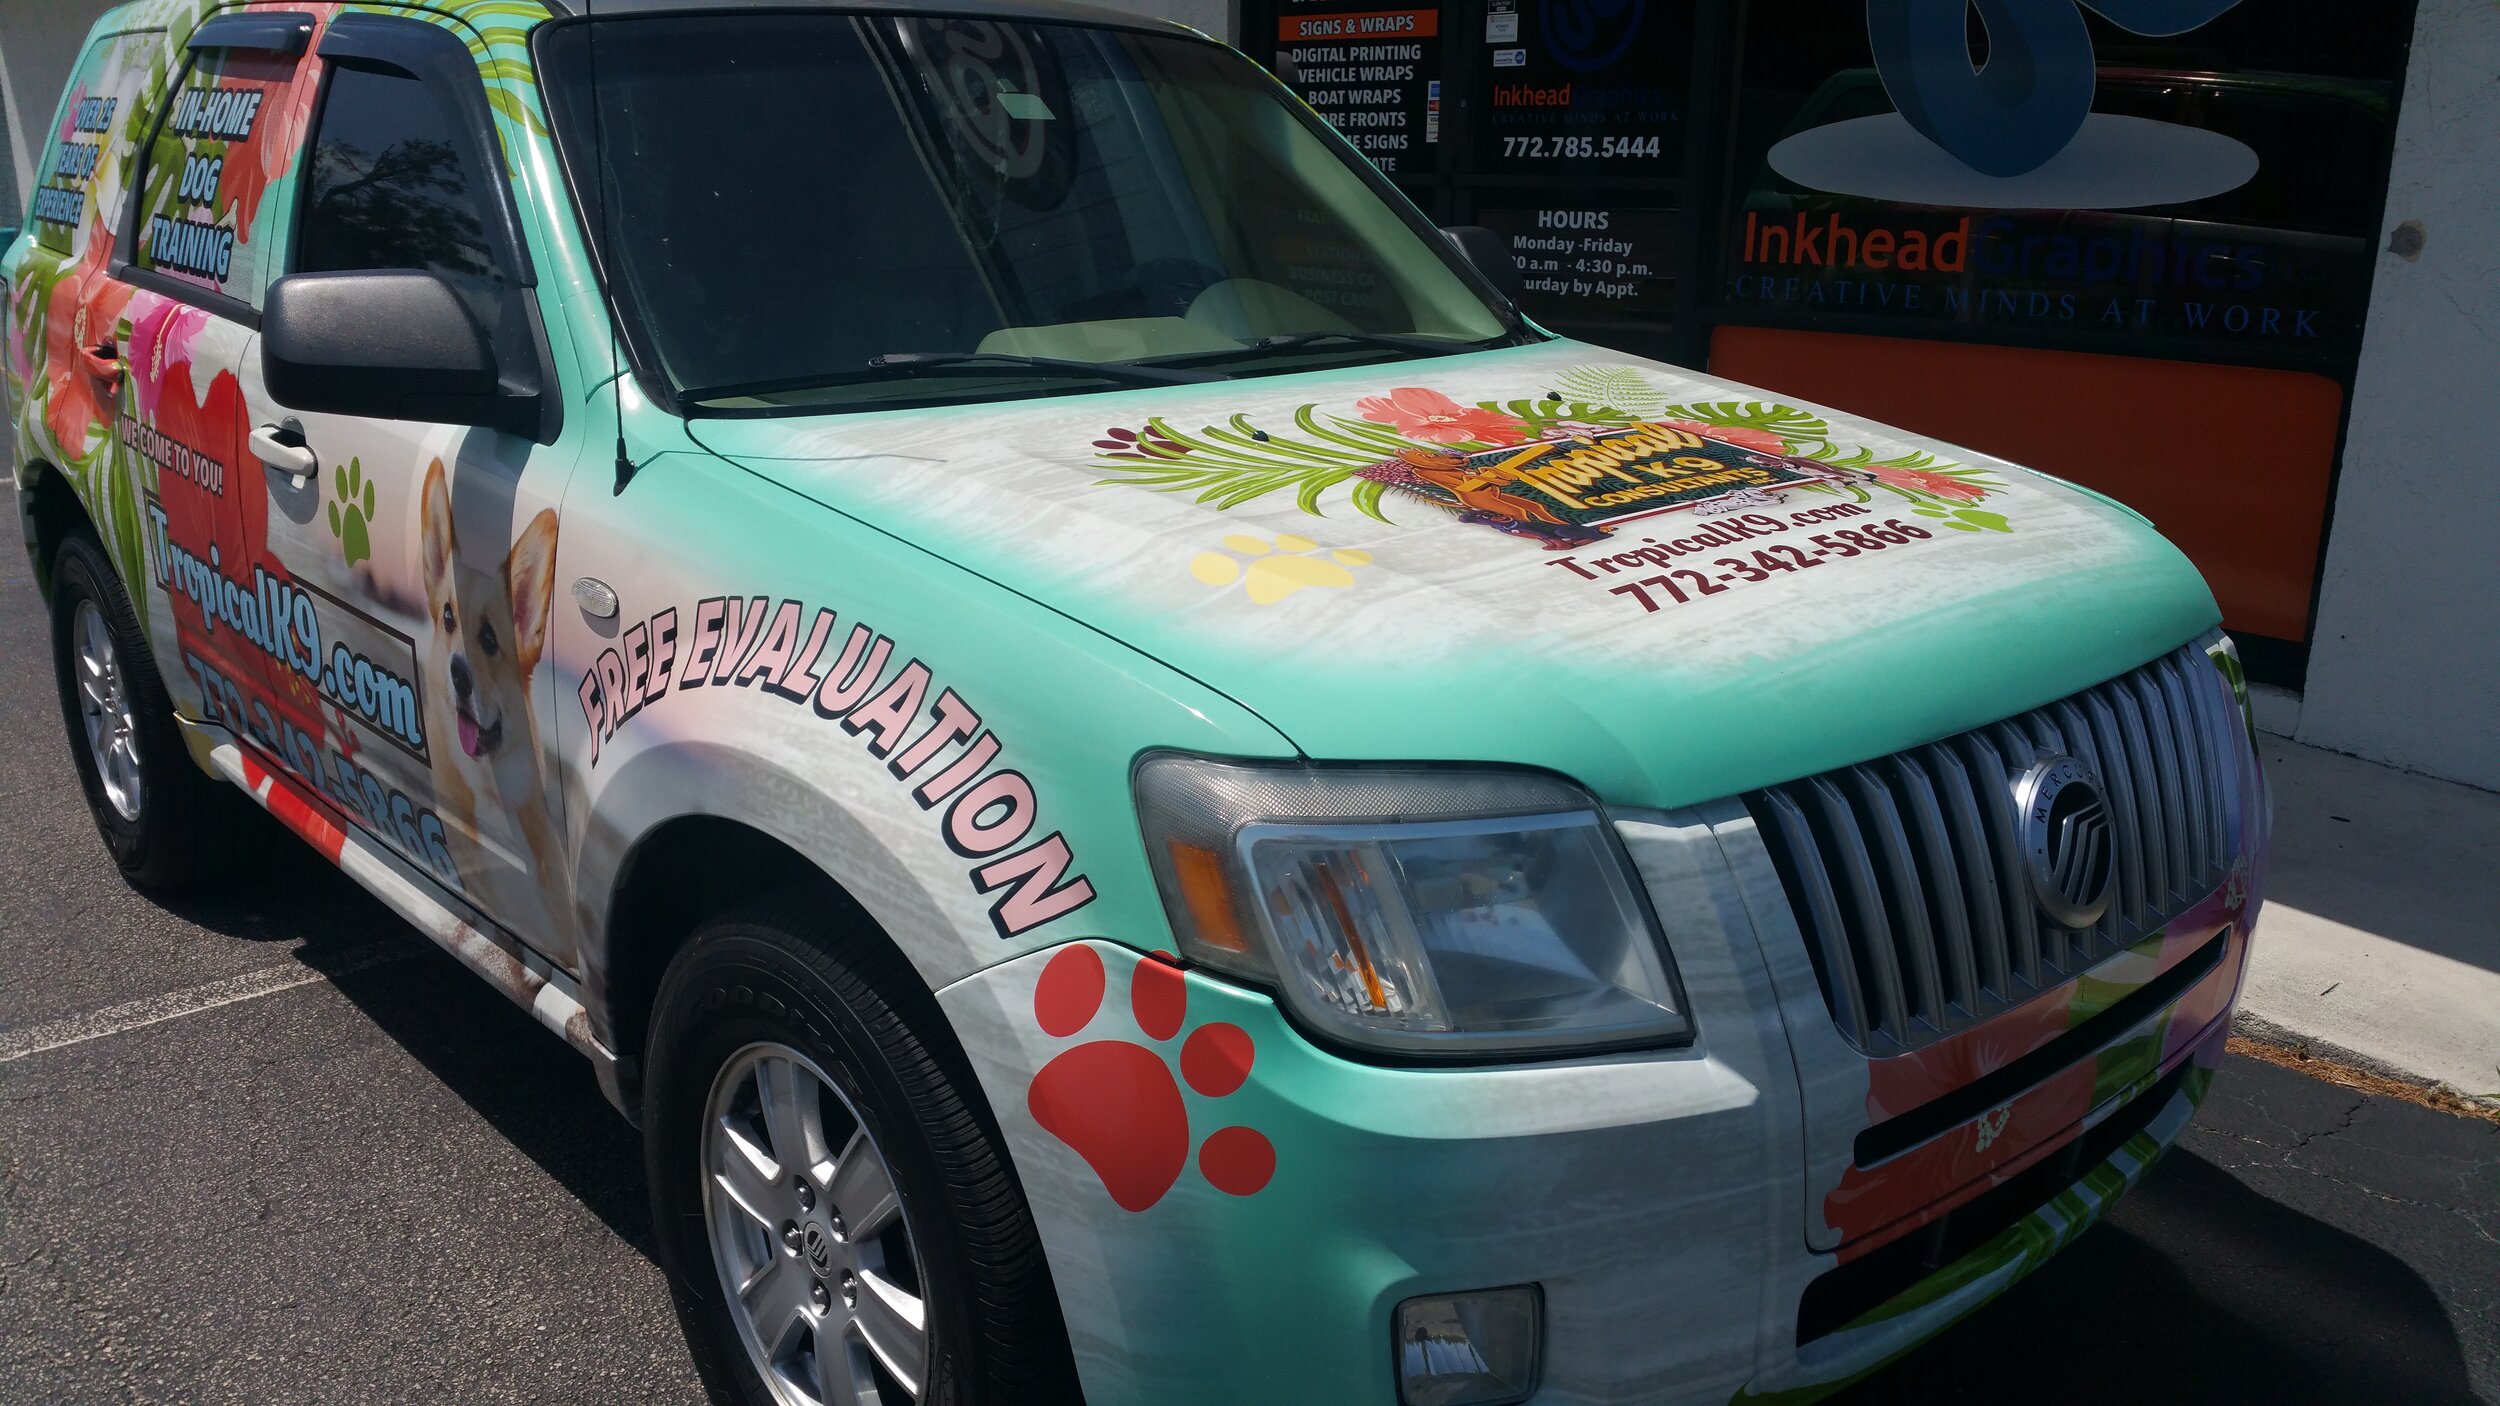 Top 6 Common Myths Related To Vinyl Car Wraps - Twiisted Design and Print  Media